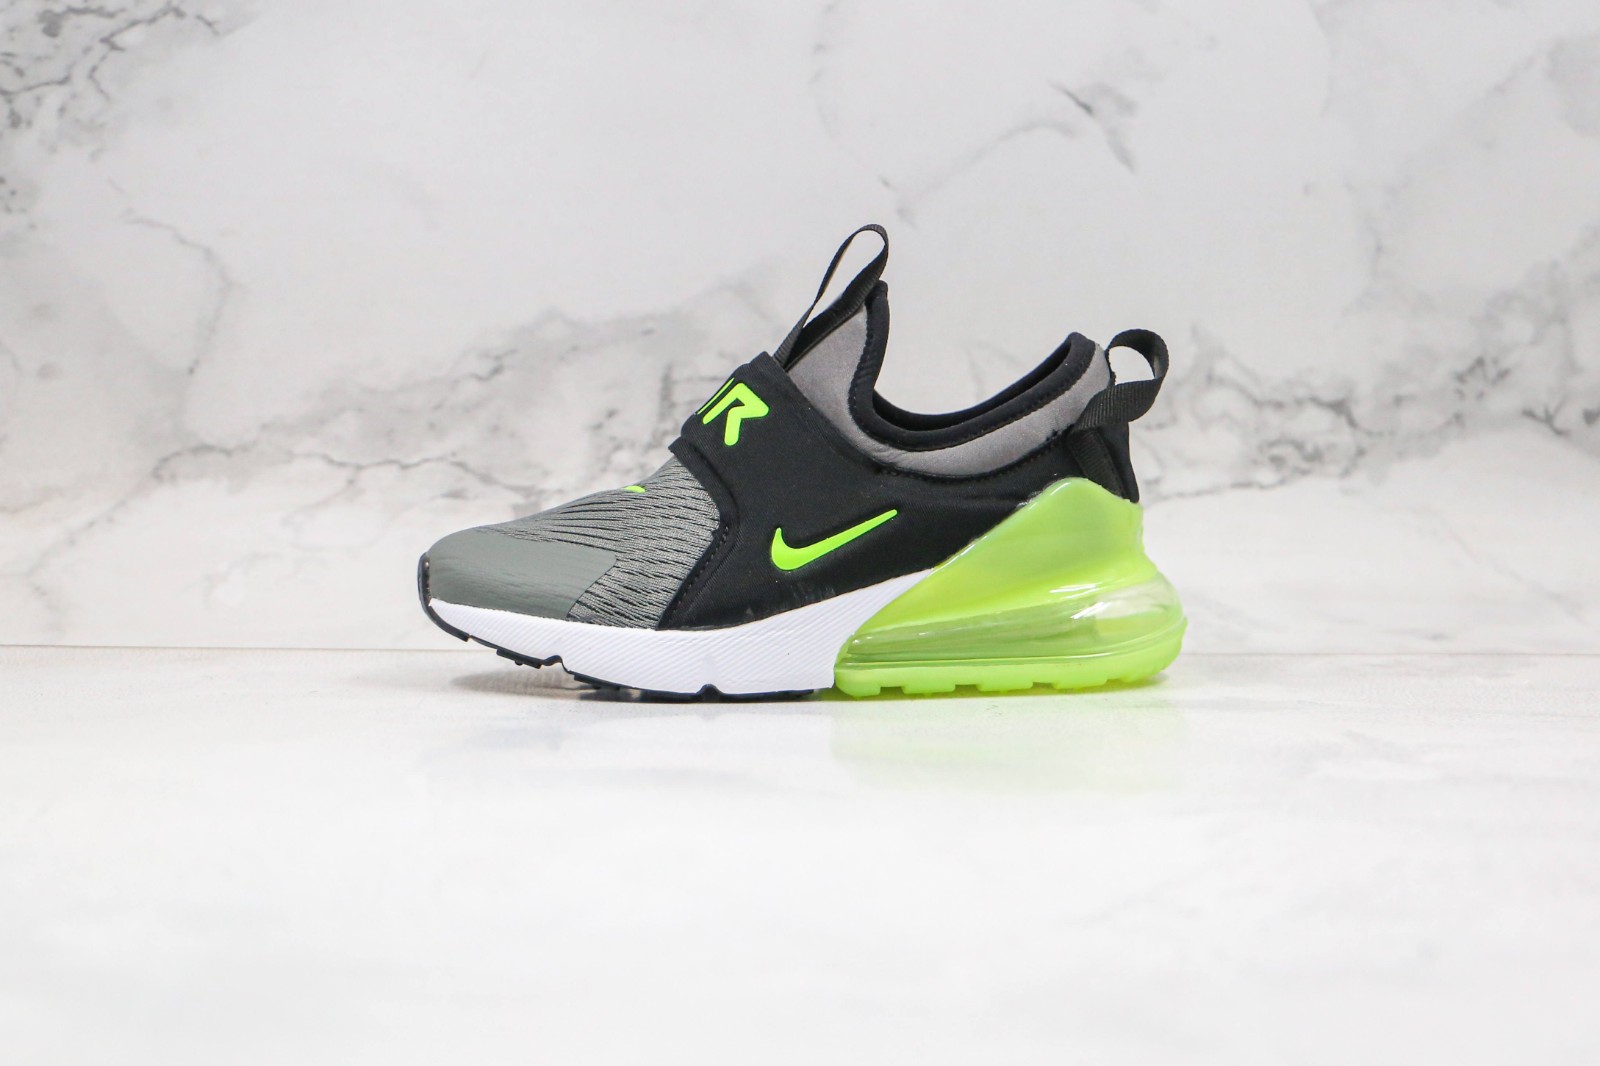 Para aumentar Pepino tubo respirador 2020 Nike nike flex grey silver pink diabeticground black roses Extreme  Running Shoes Grey Black Fluorescent Green CI1107 - rainbow colored nike  elite shoes - MultiscaleconsultingShops - 070